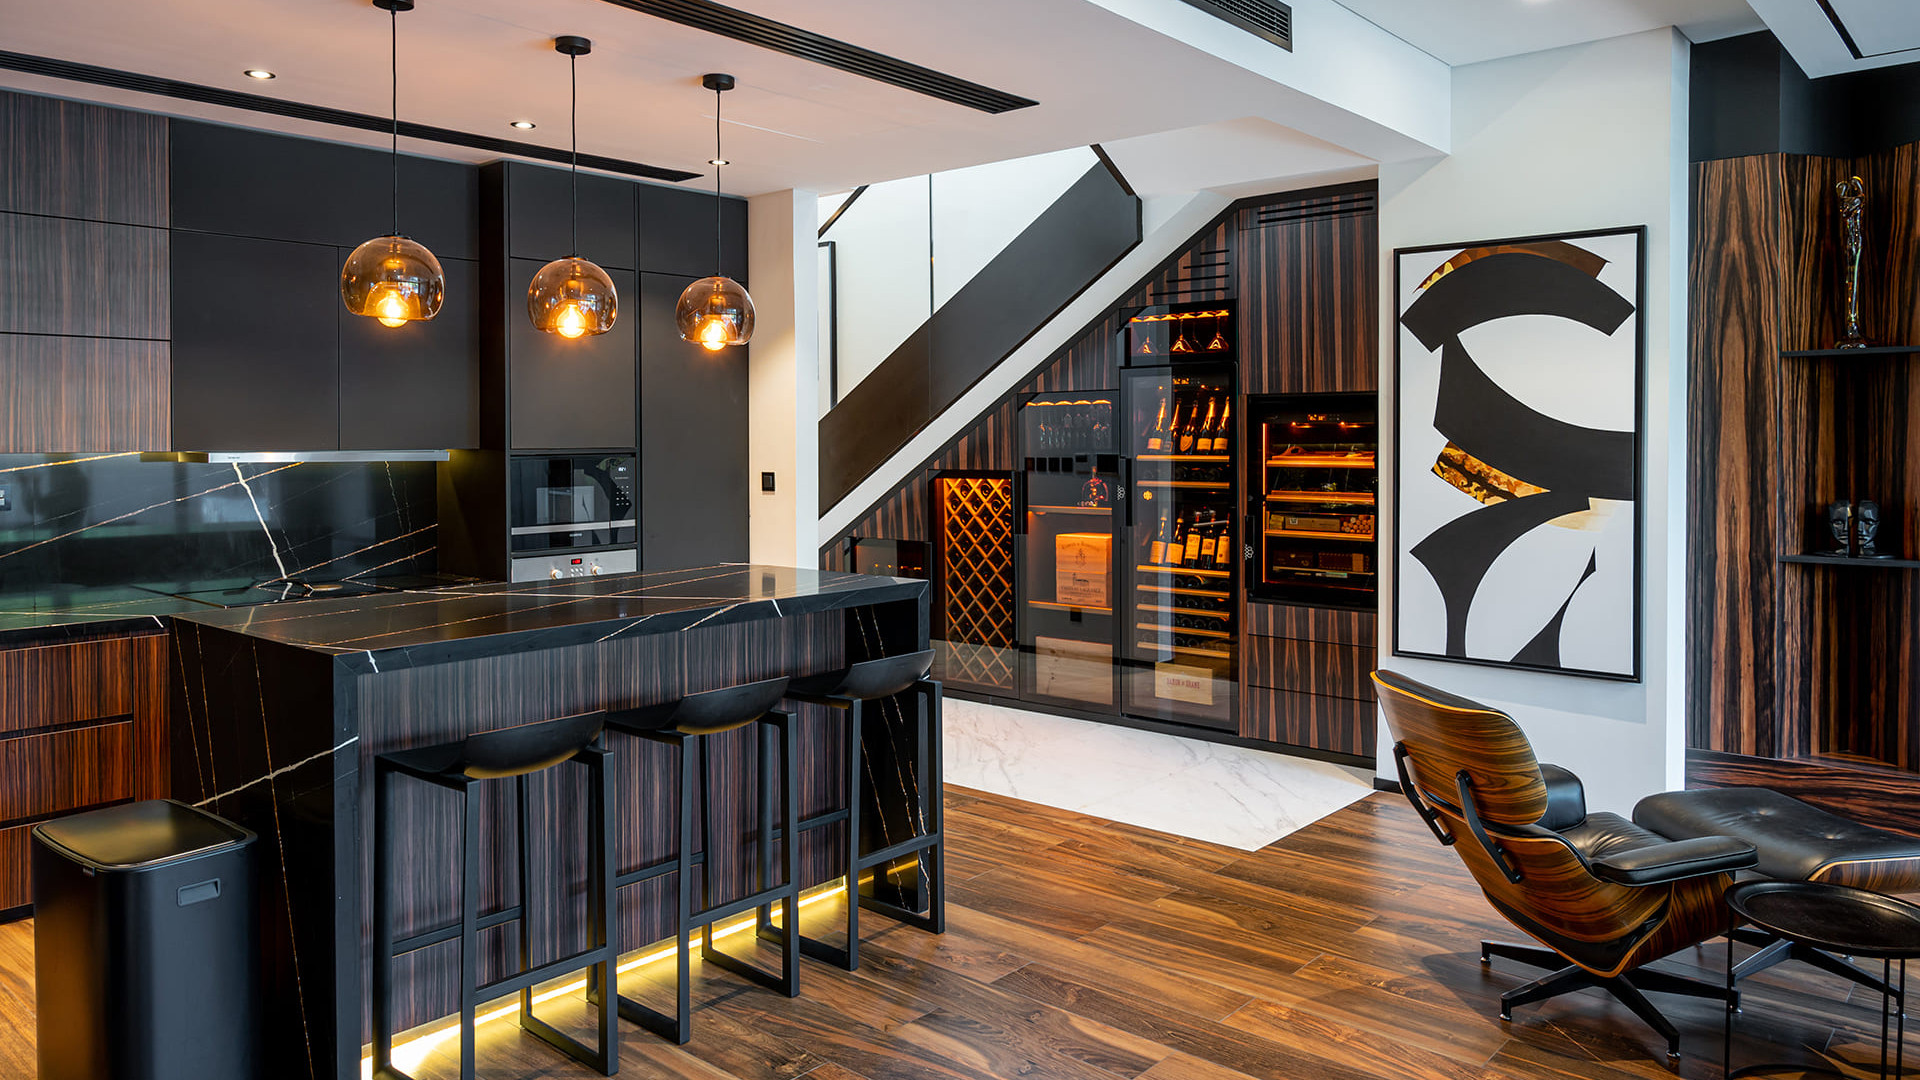 Wine and cigar home station - wall cabinet created under the stairs in an architect's apartment with high-end interior decoration.